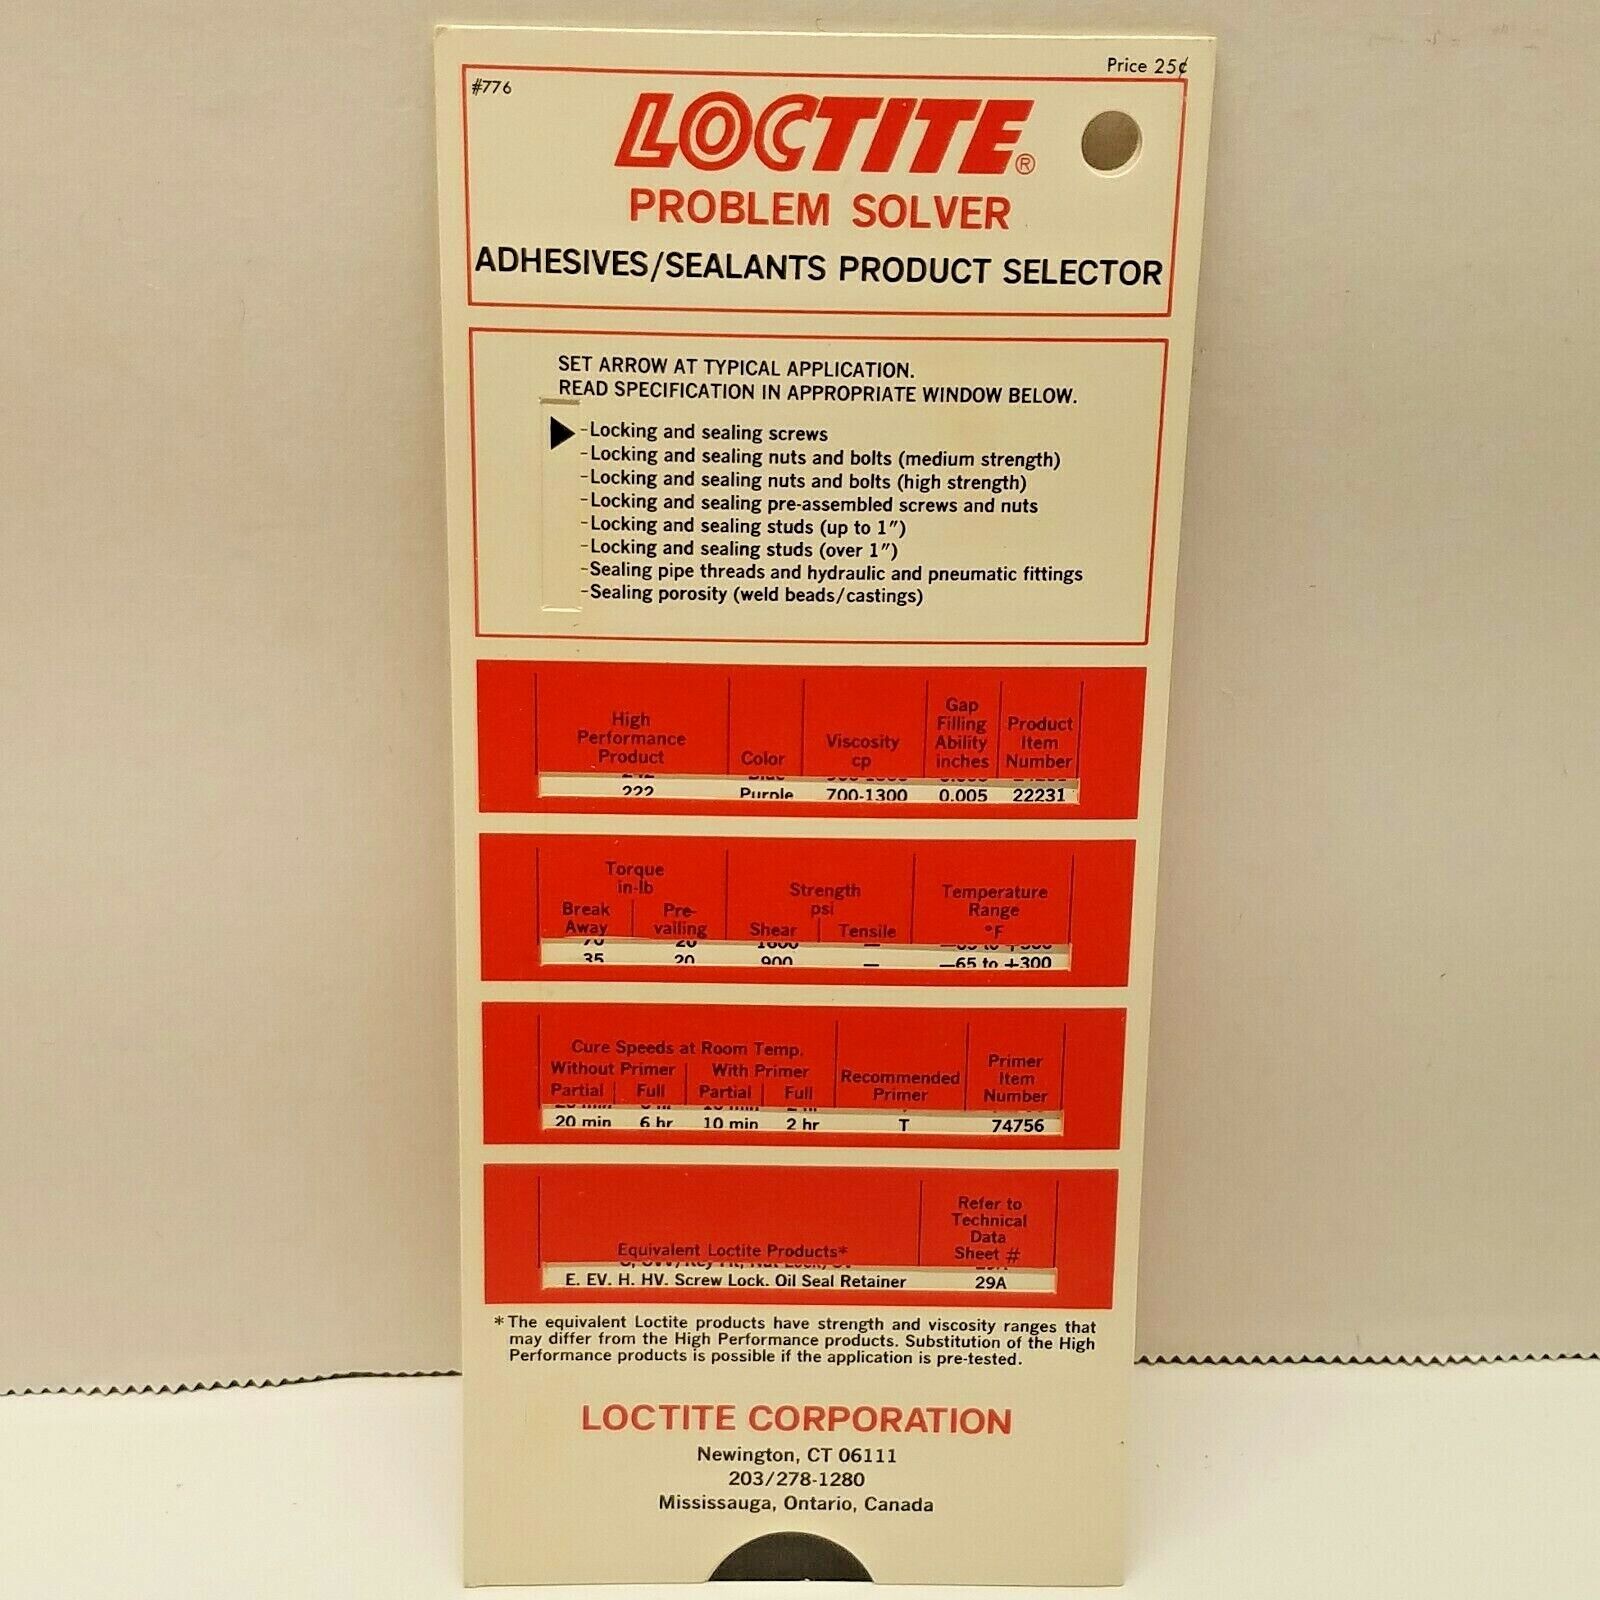 VTG Loctite Problem Solver Adhesives Sealants Product Selector Advertising Slide